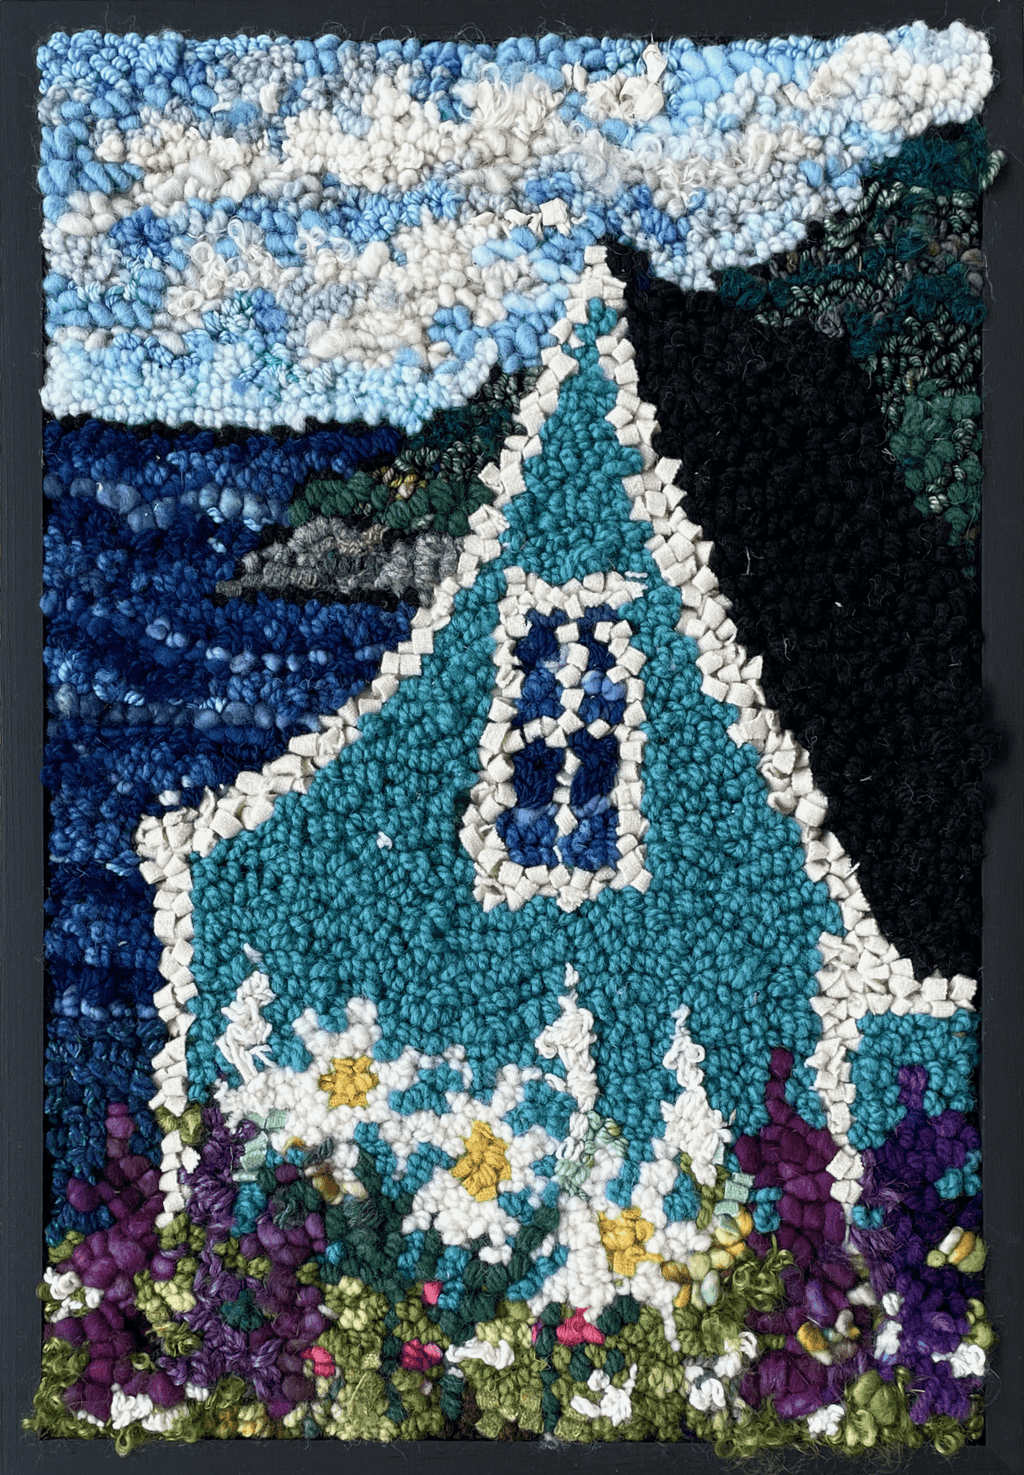 update alt-text with template Turquoise House and Daisies 14.5" x 17.5" Framed-Deanne Fitzpatrick Rug Hooking Studio-Rug Hooking Kit -Rug Hooking Pattern -Rug Hooking -Deanne Fitzpatrick Rug Hooking Studio -Is rug hooking the same as punch needle?